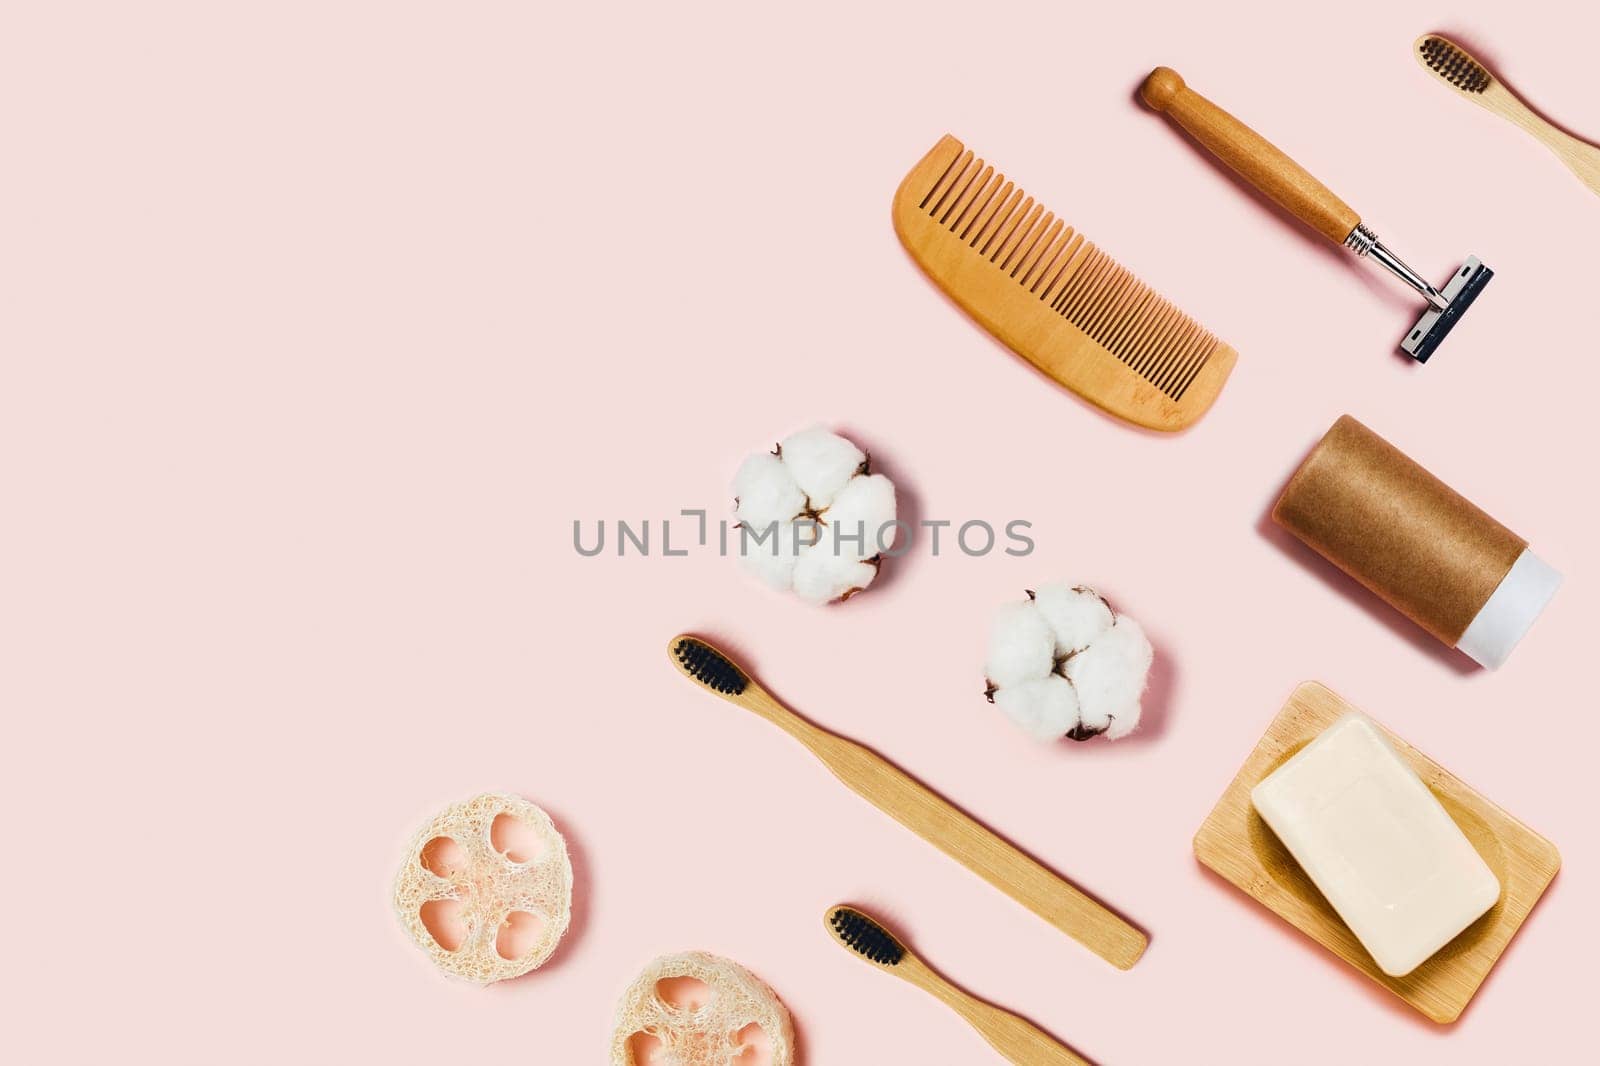 Bathroom accessories on pink background. Natural bamboo toothbrushes, sponges, cotton flowers, shaving brush and soap. Flat lay, top view.